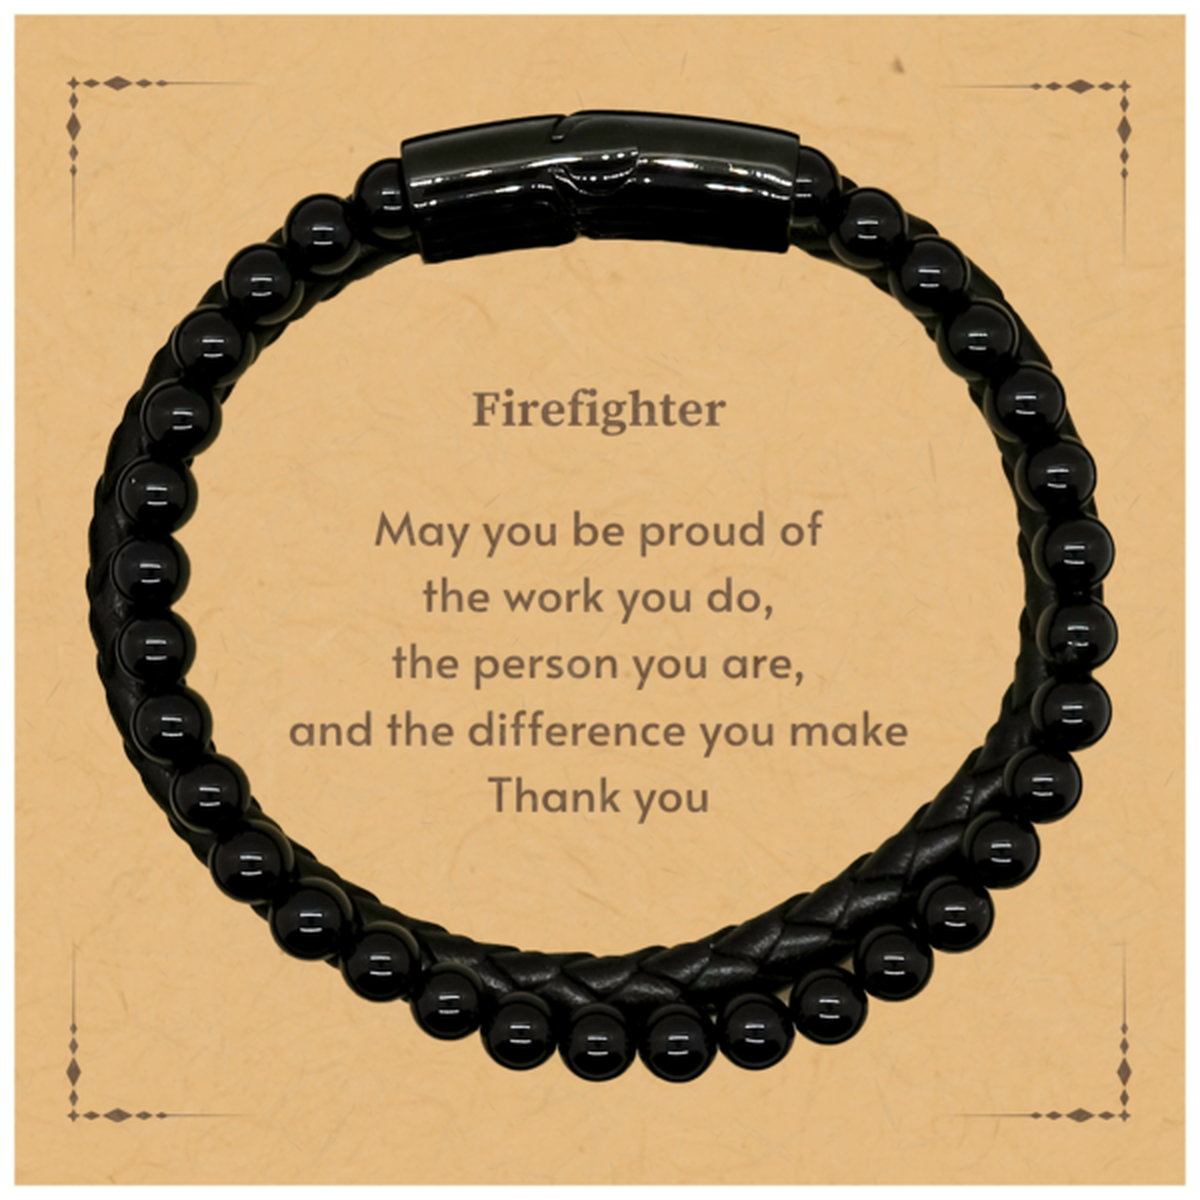 Heartwarming Stone Leather Bracelets Retirement Coworkers Gifts for Firefighter, Firefighter May You be proud of the work you do, the person you are Gifts for Boss Men Women Friends